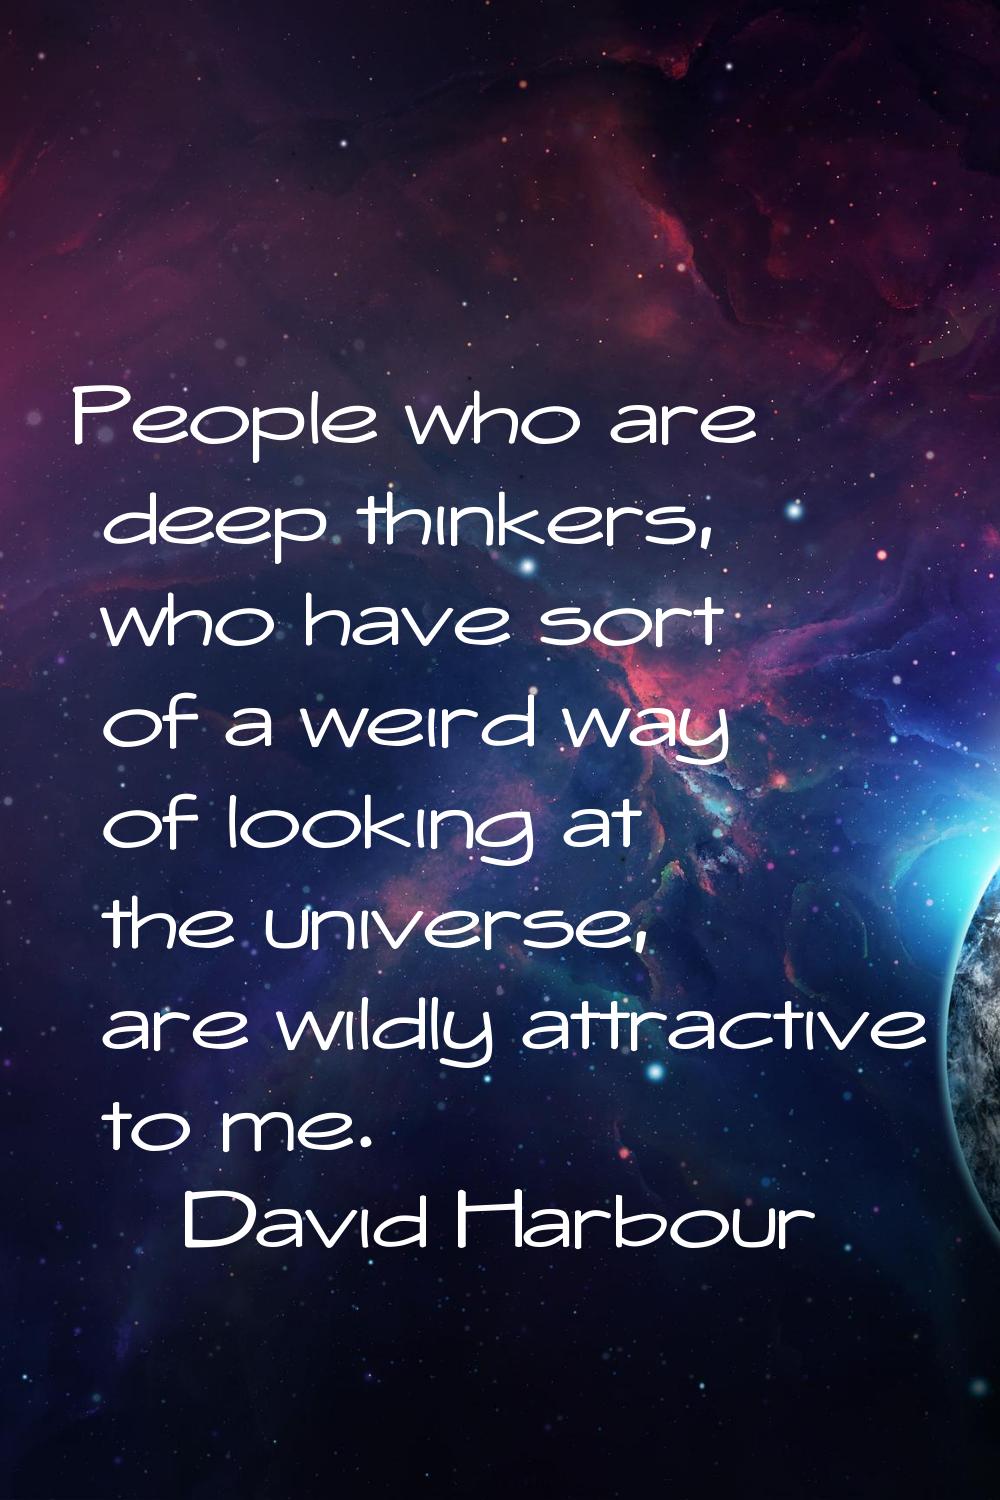 People who are deep thinkers, who have sort of a weird way of looking at the universe, are wildly a